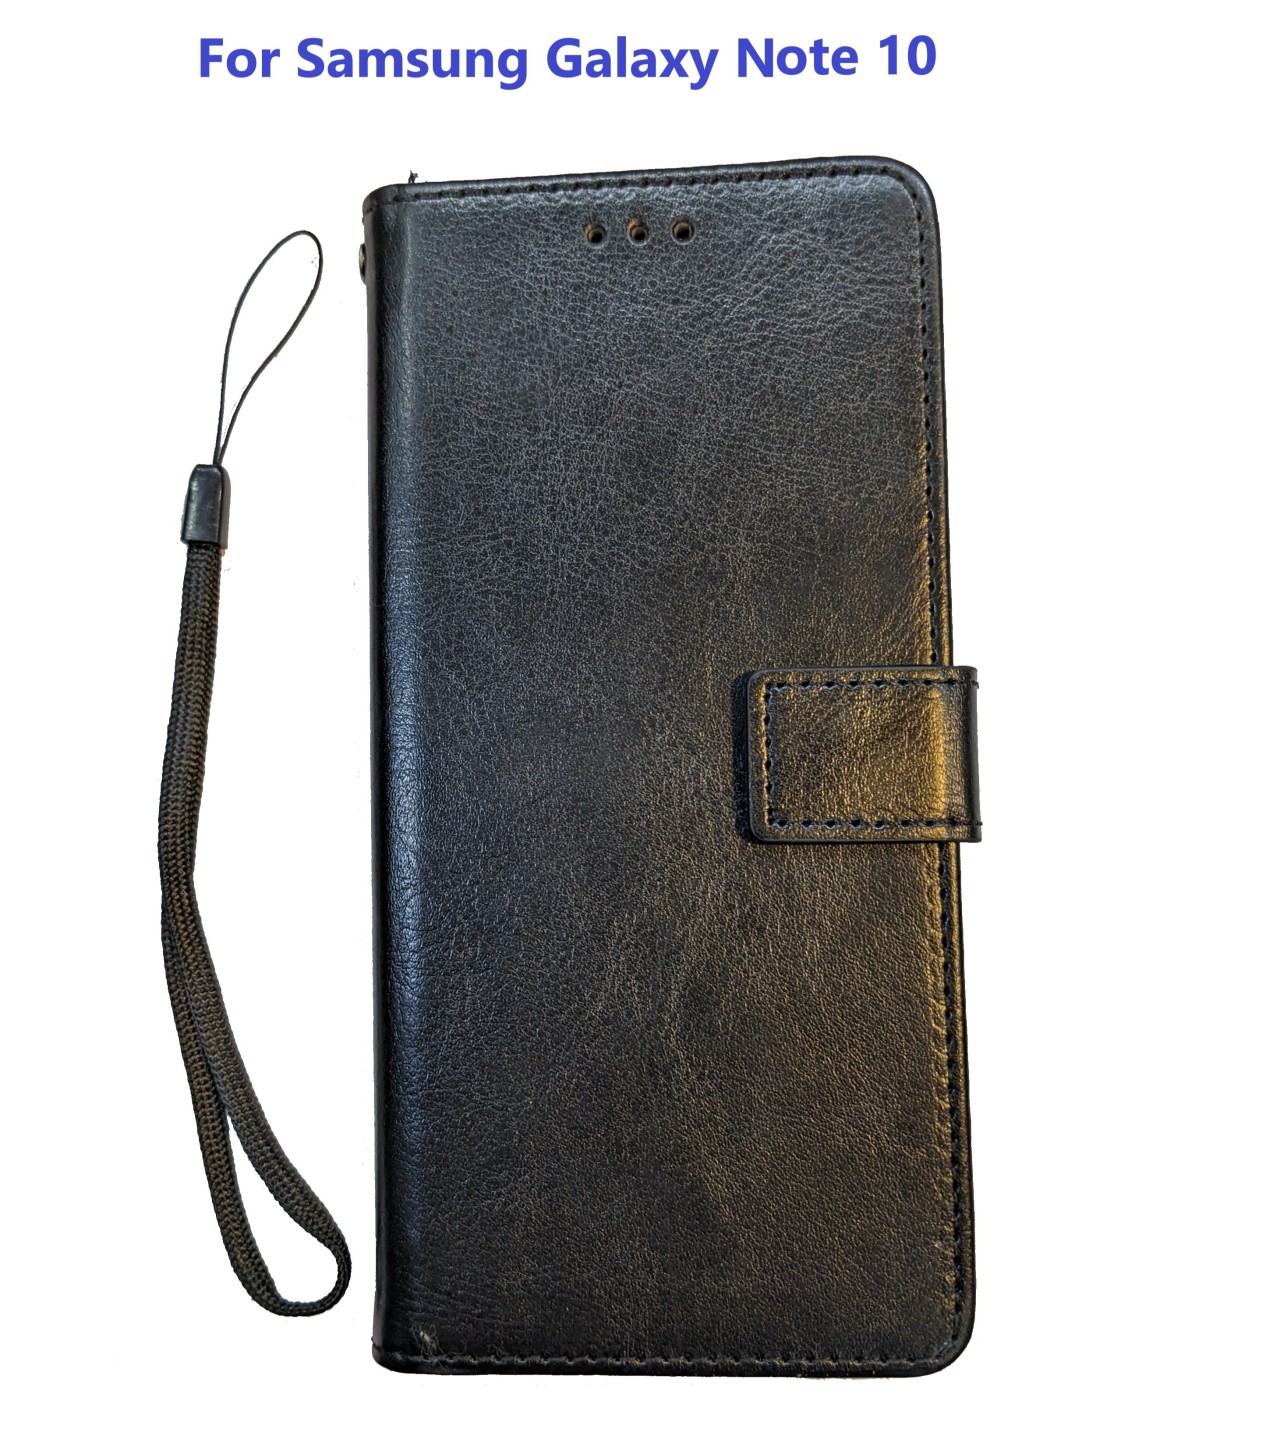 Flip book Wallet Leather Samsung Galaxy Note 10 Case with magnetic layer